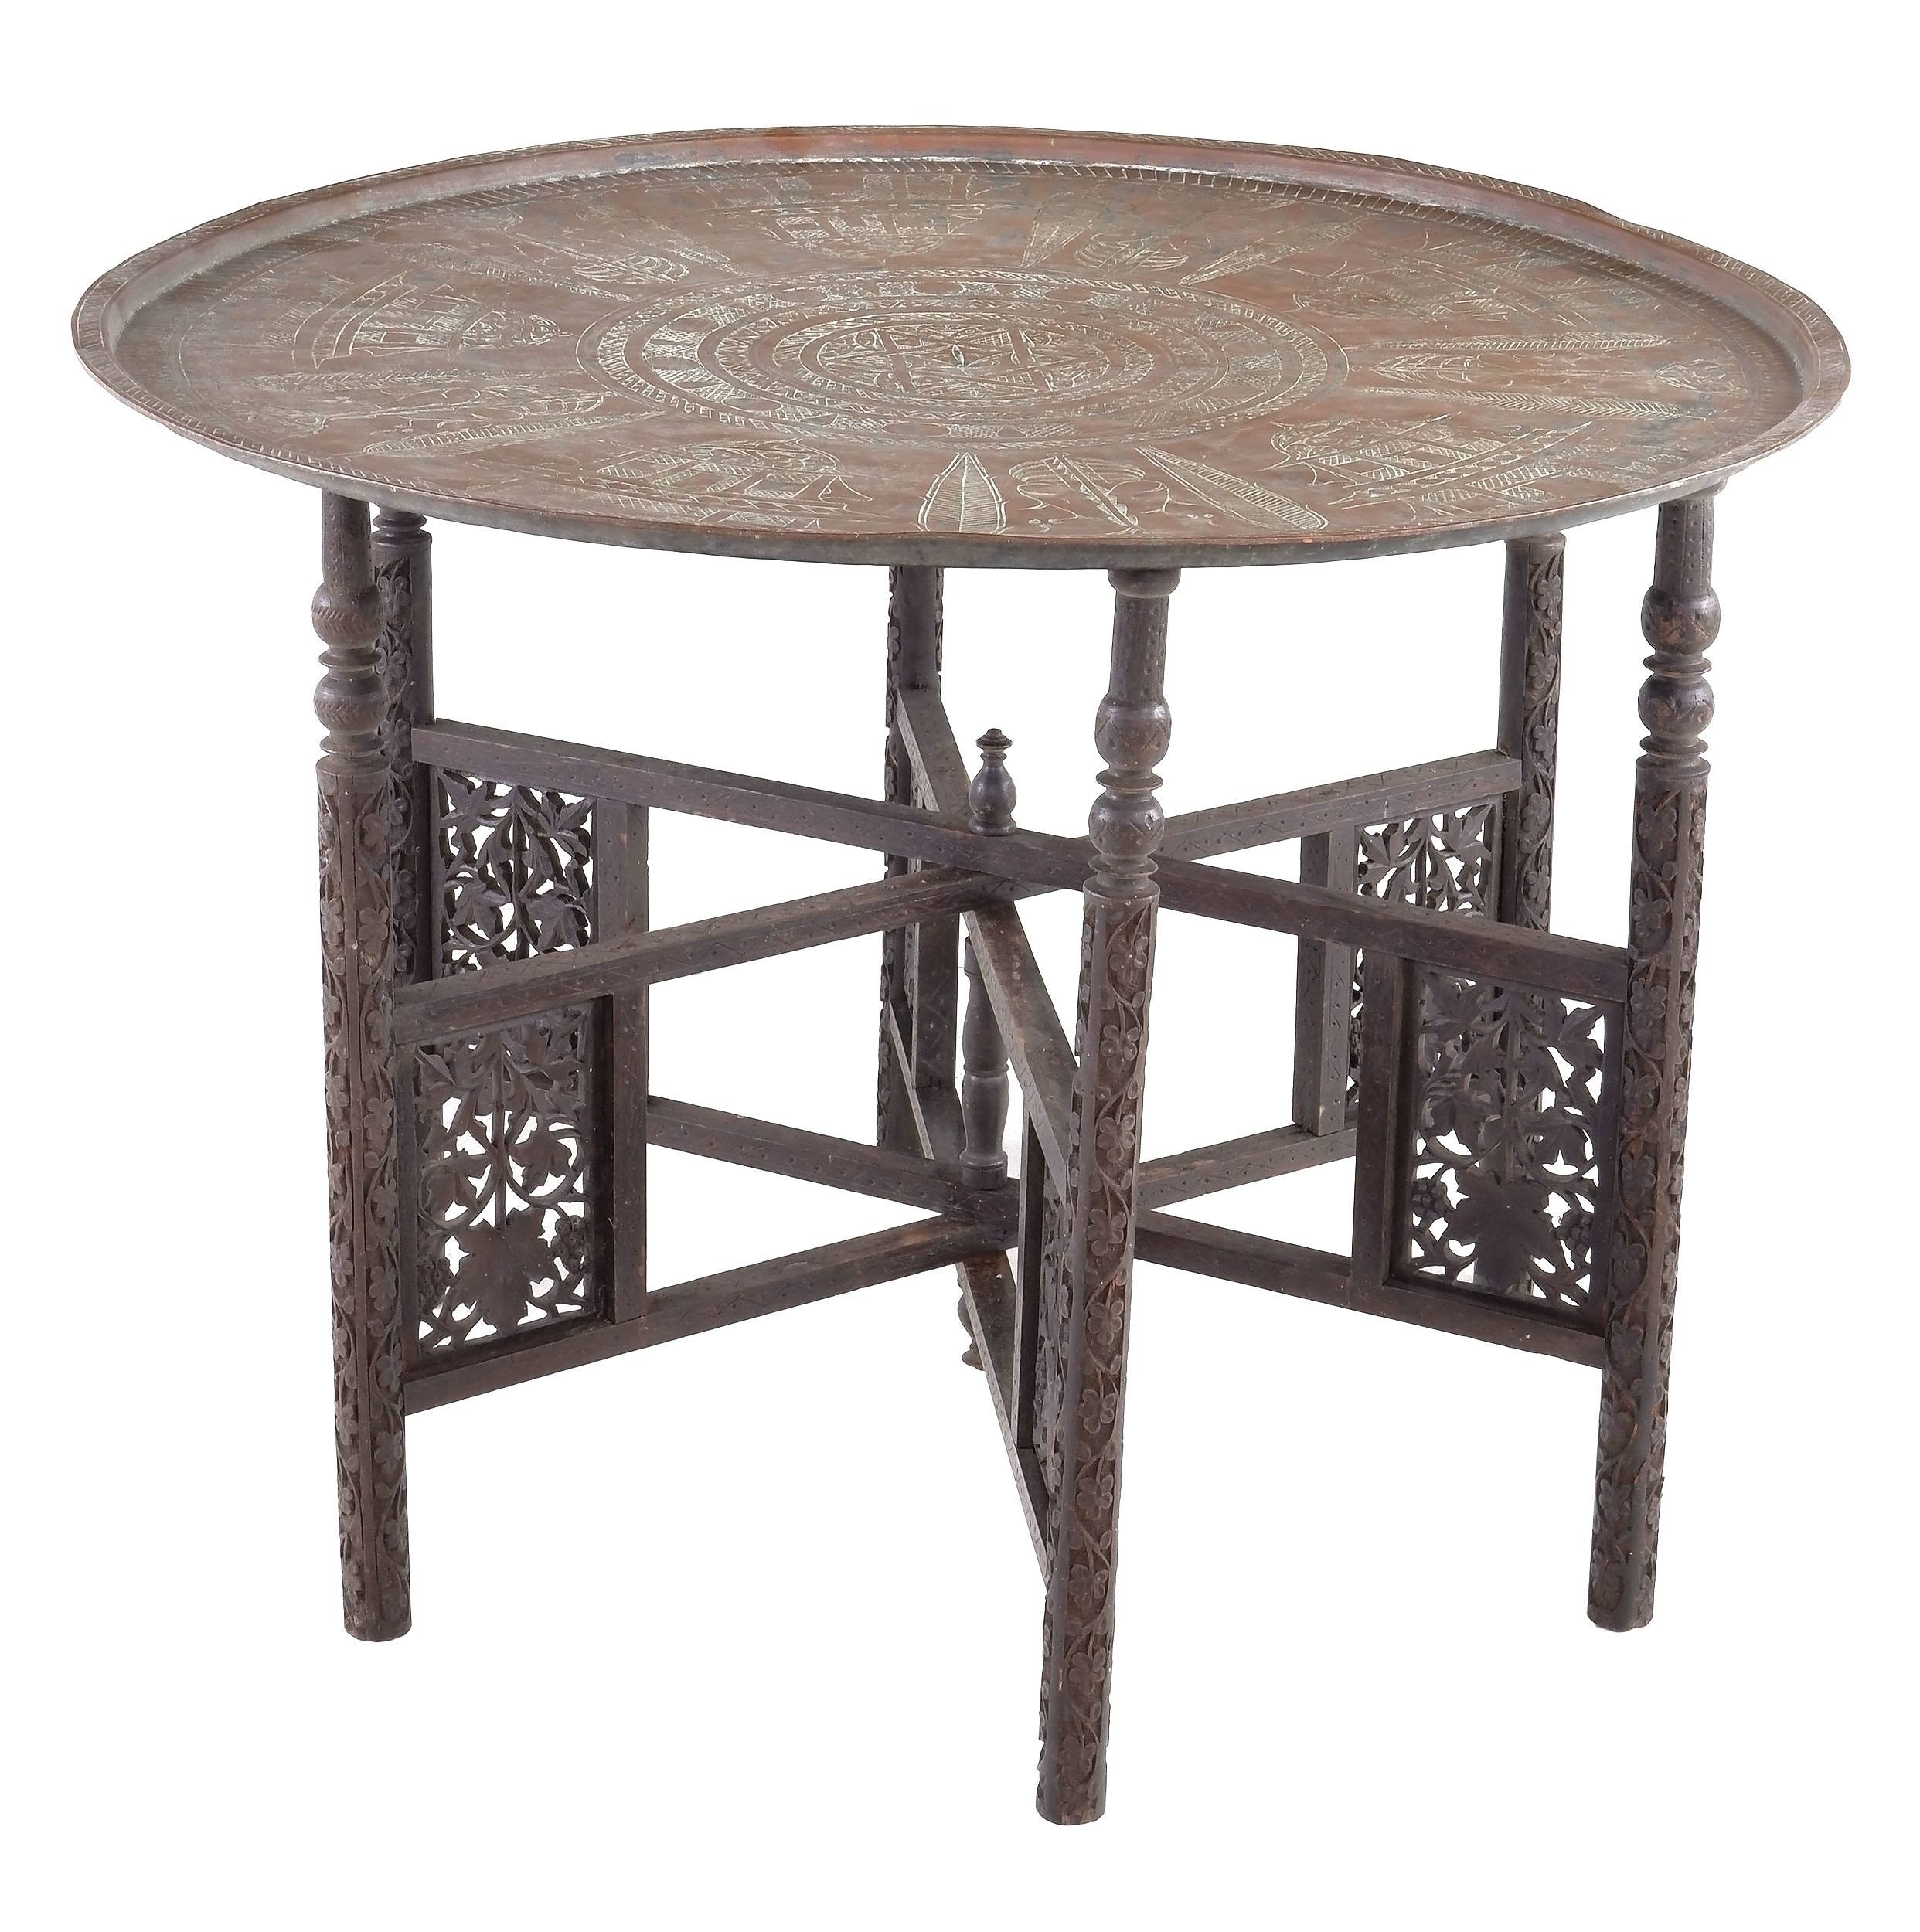 'Large Indian Carved and Pierced Folding Table with Engraved Copper Top, Early 20th Century'